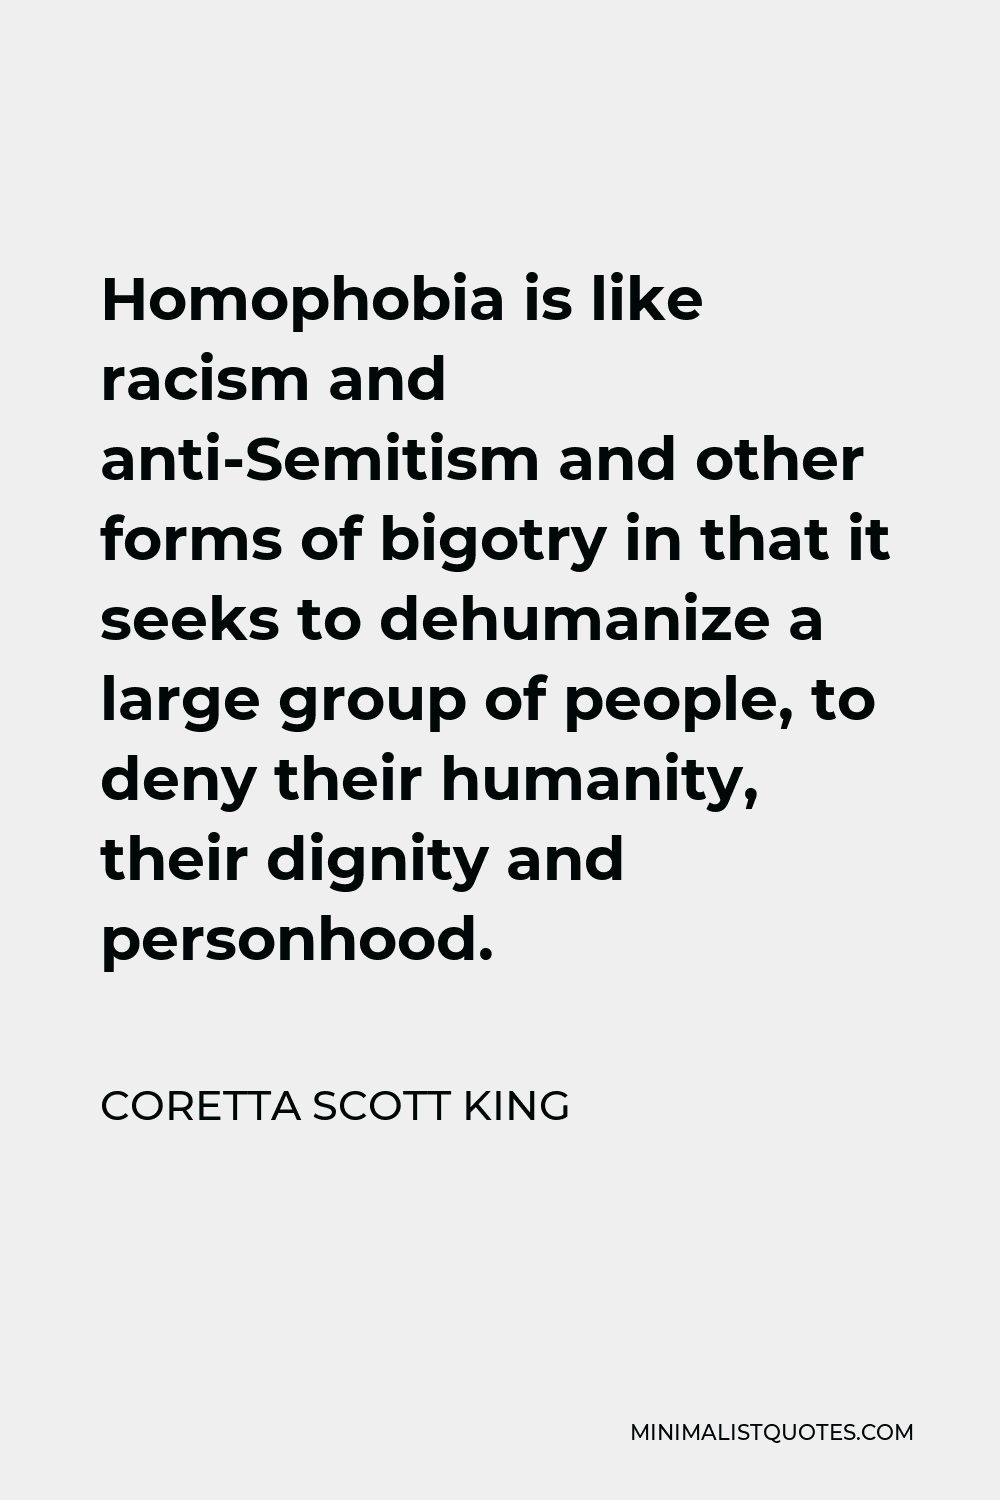 Coretta Scott King Quote - Homophobia is like racism and anti-Semitism and other forms of bigotry in that it seeks to dehumanize a large group of people, to deny their humanity, their dignity and personhood.